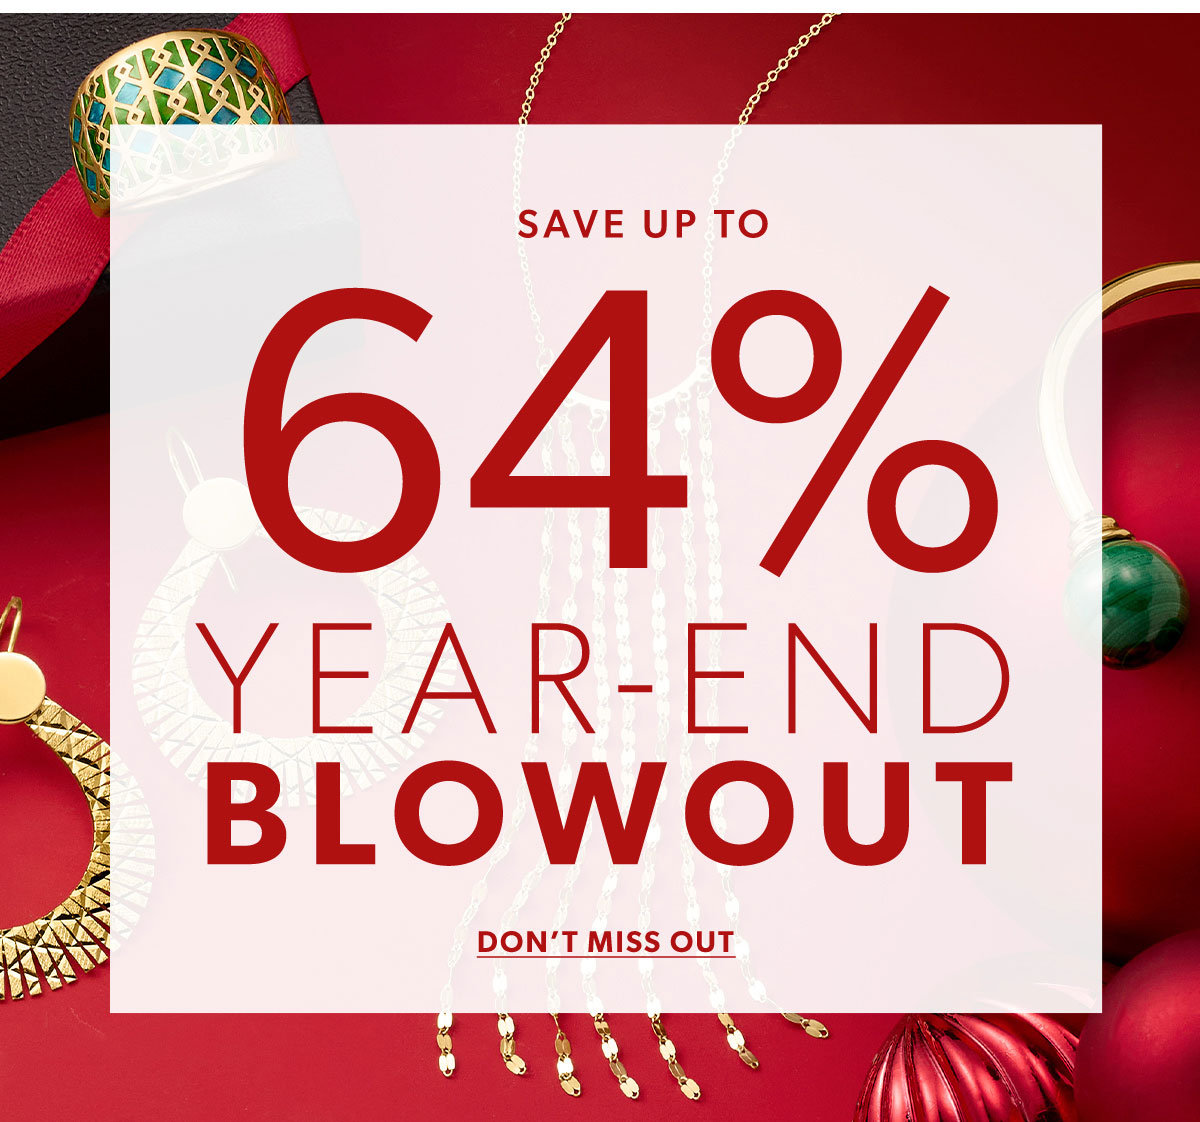 Save Up To 64% Year-End Blowout. Don't Miss Out